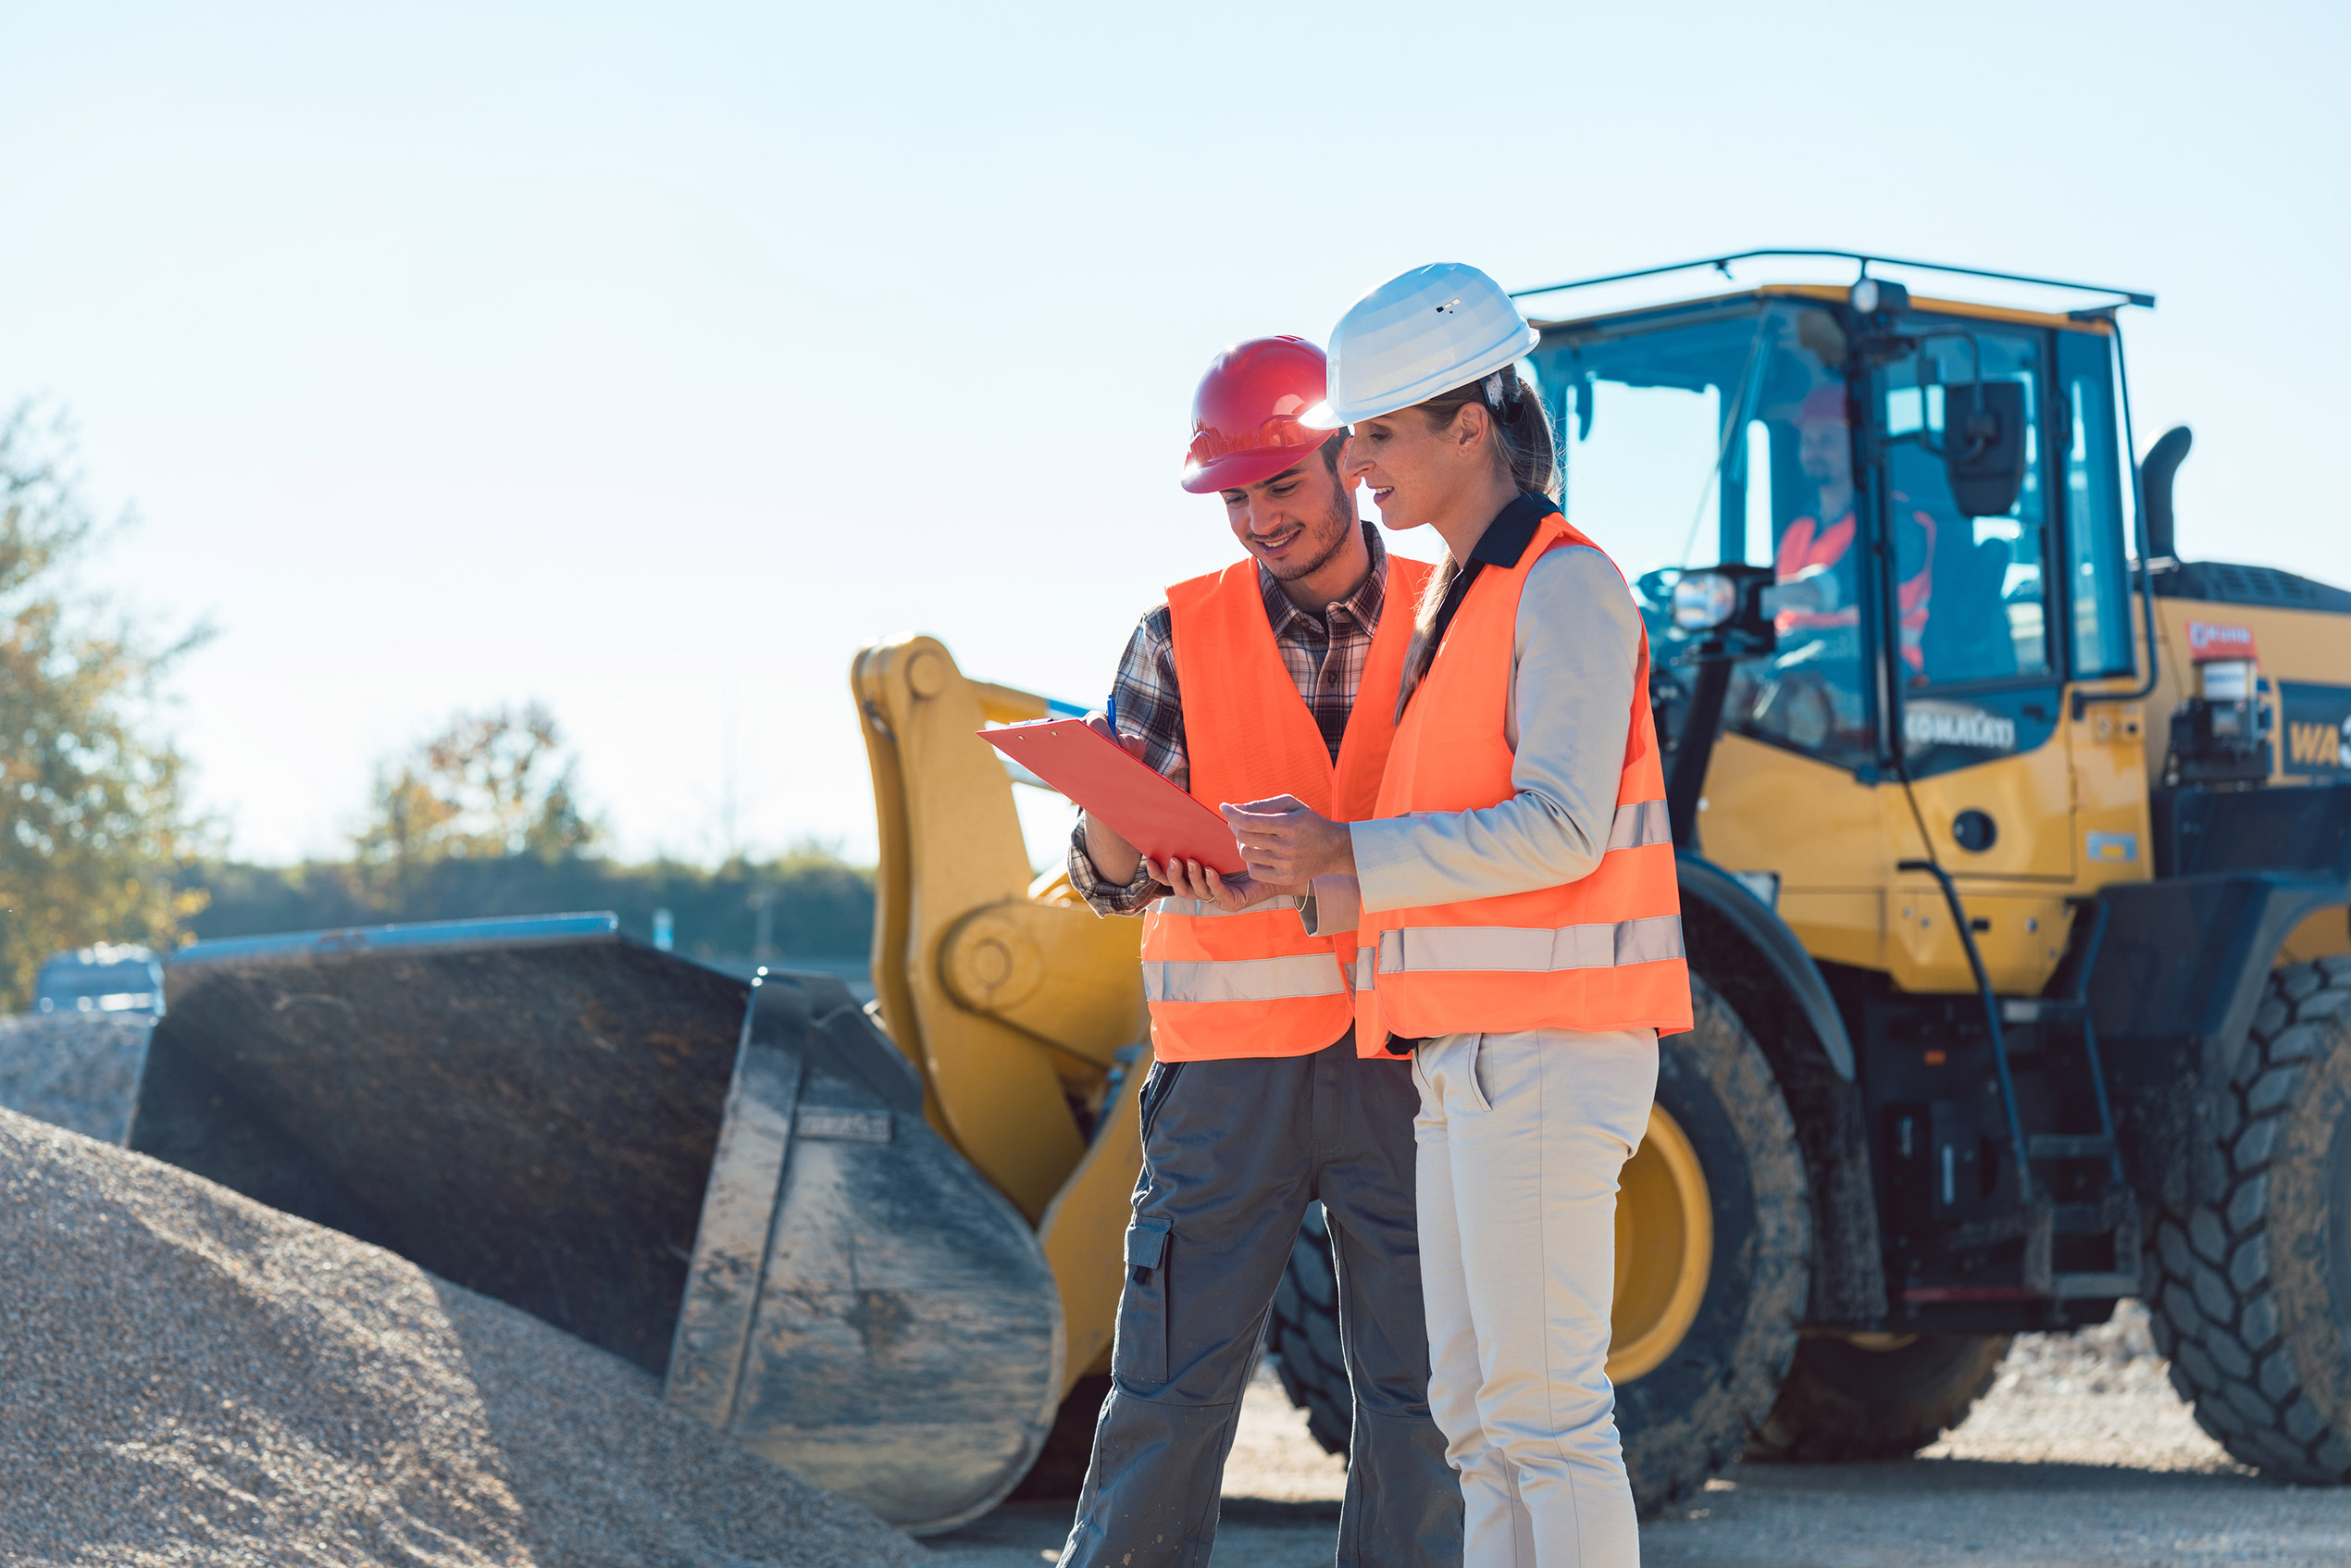 Man and woman in construction gear discussing blueprints while standing on a building site with construction equipment in the background